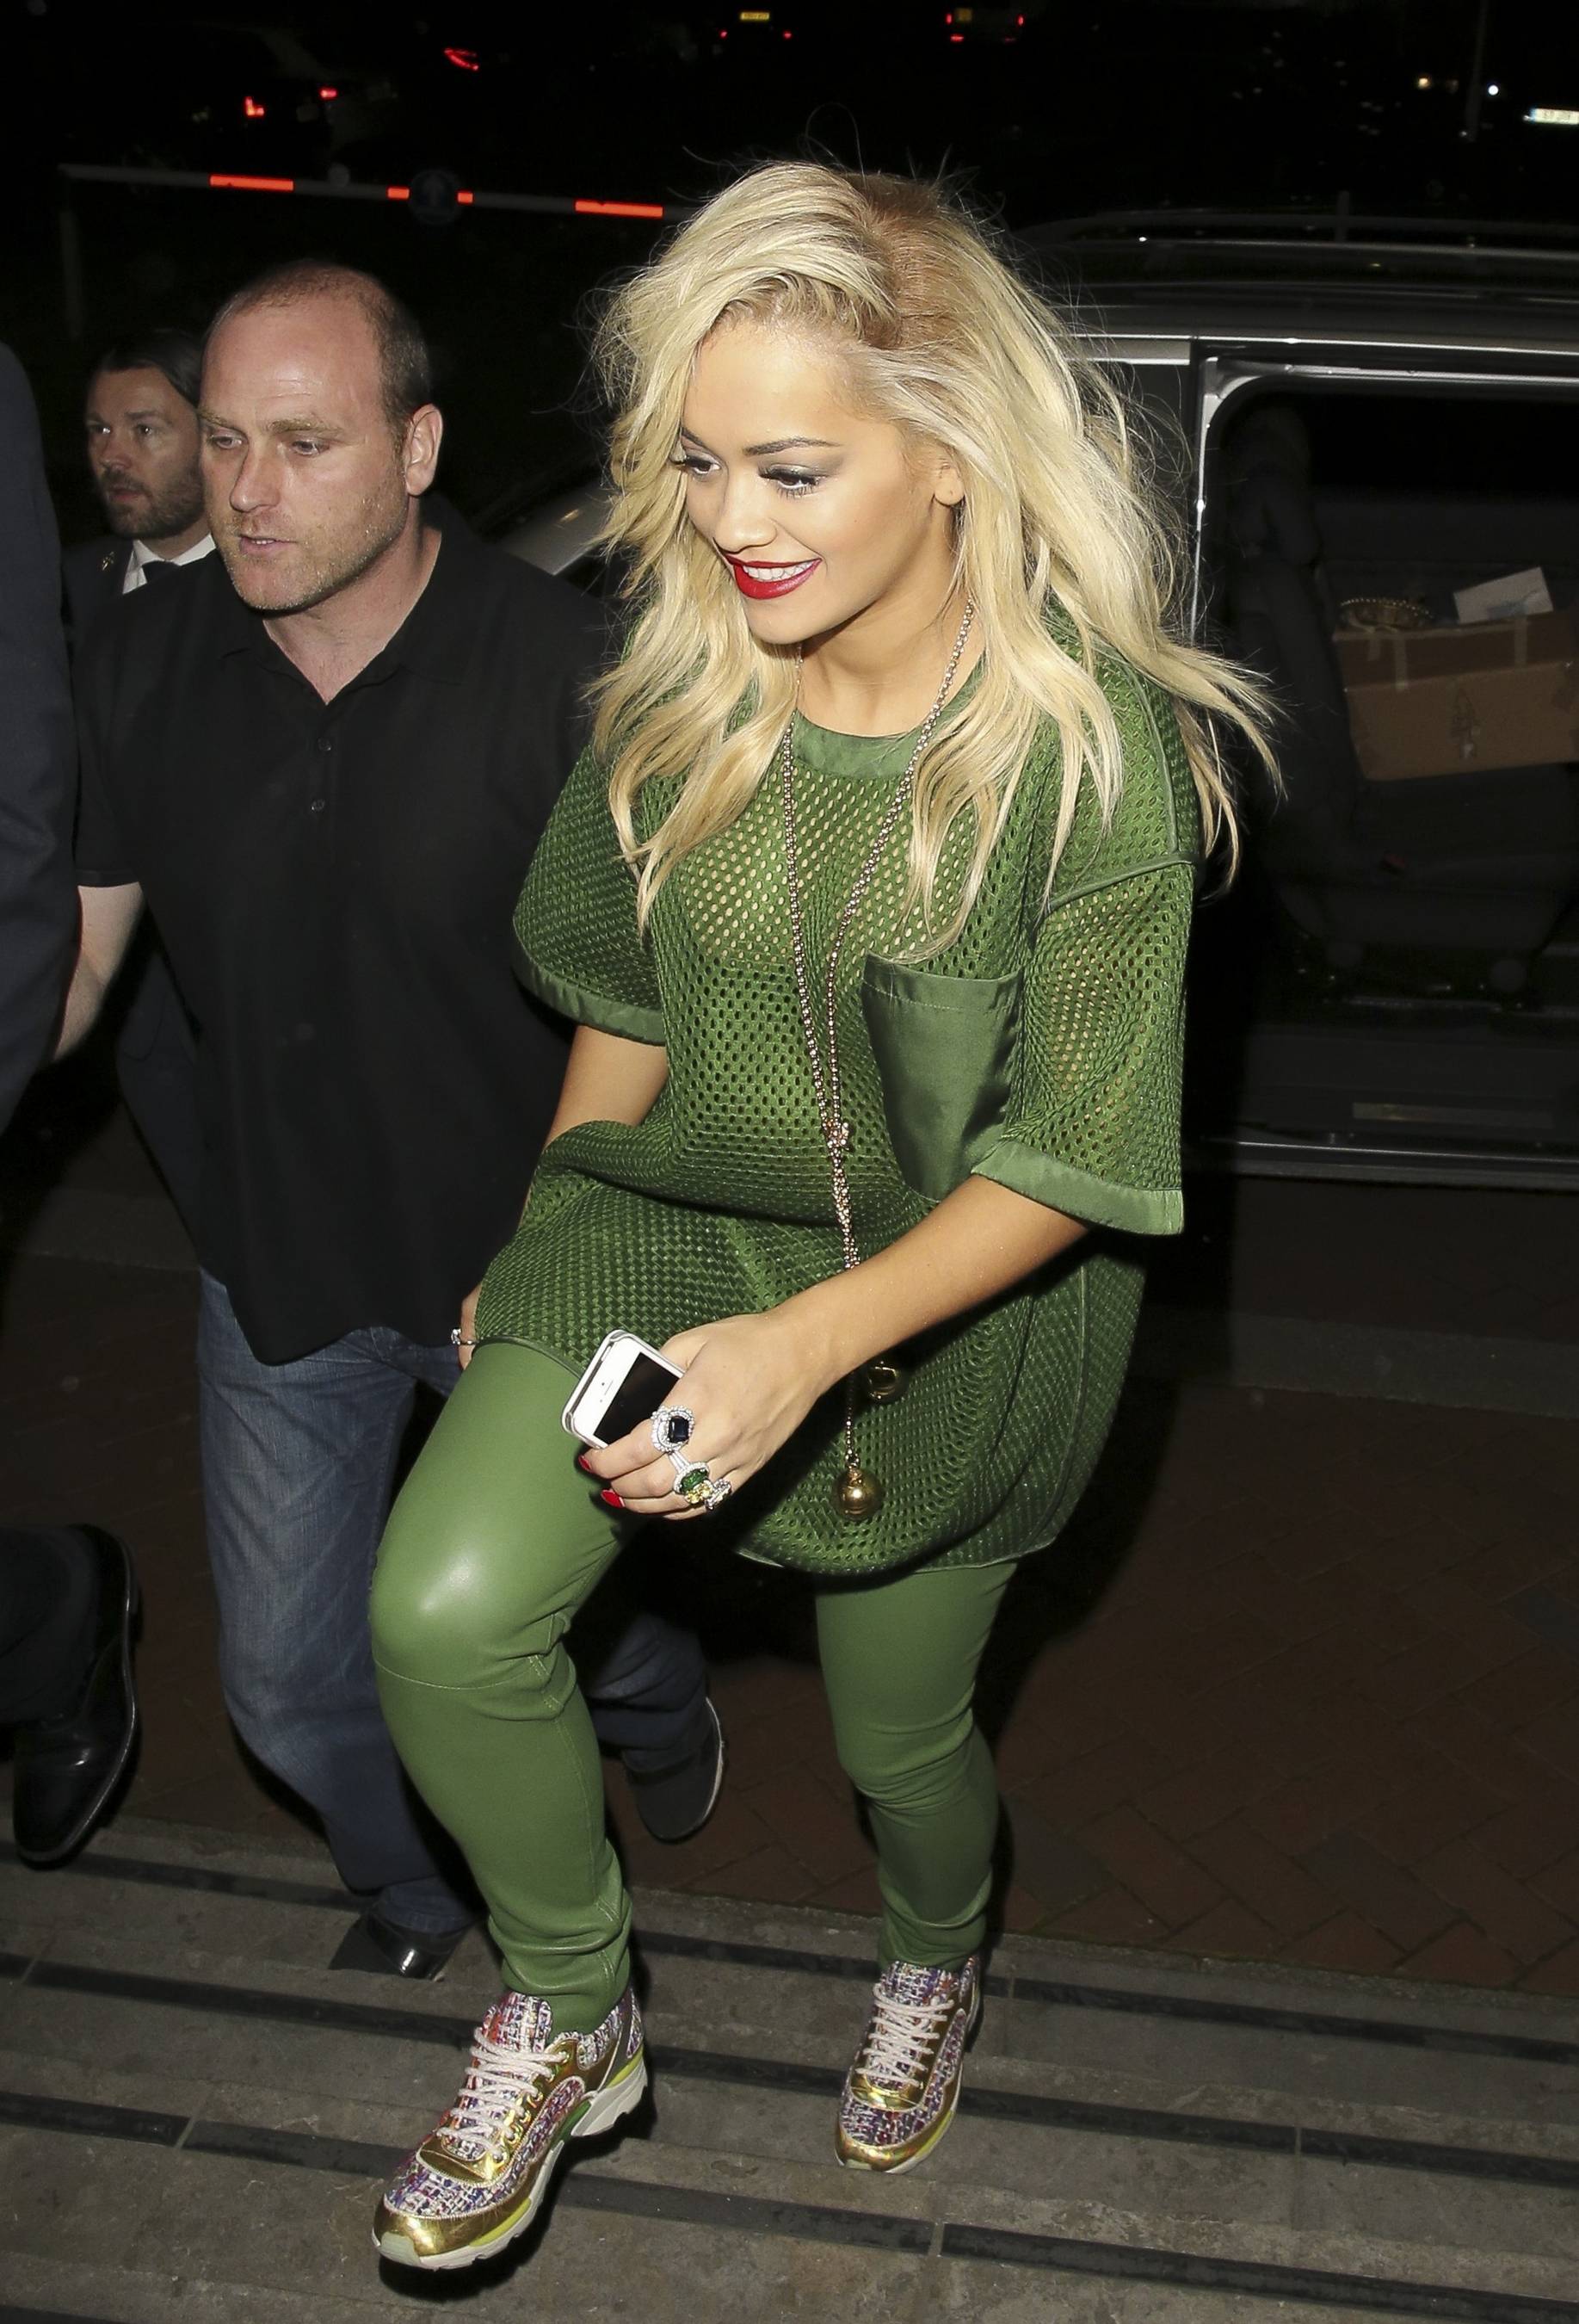 Rita Ora arrives at the Lowry Hotel in Manchester